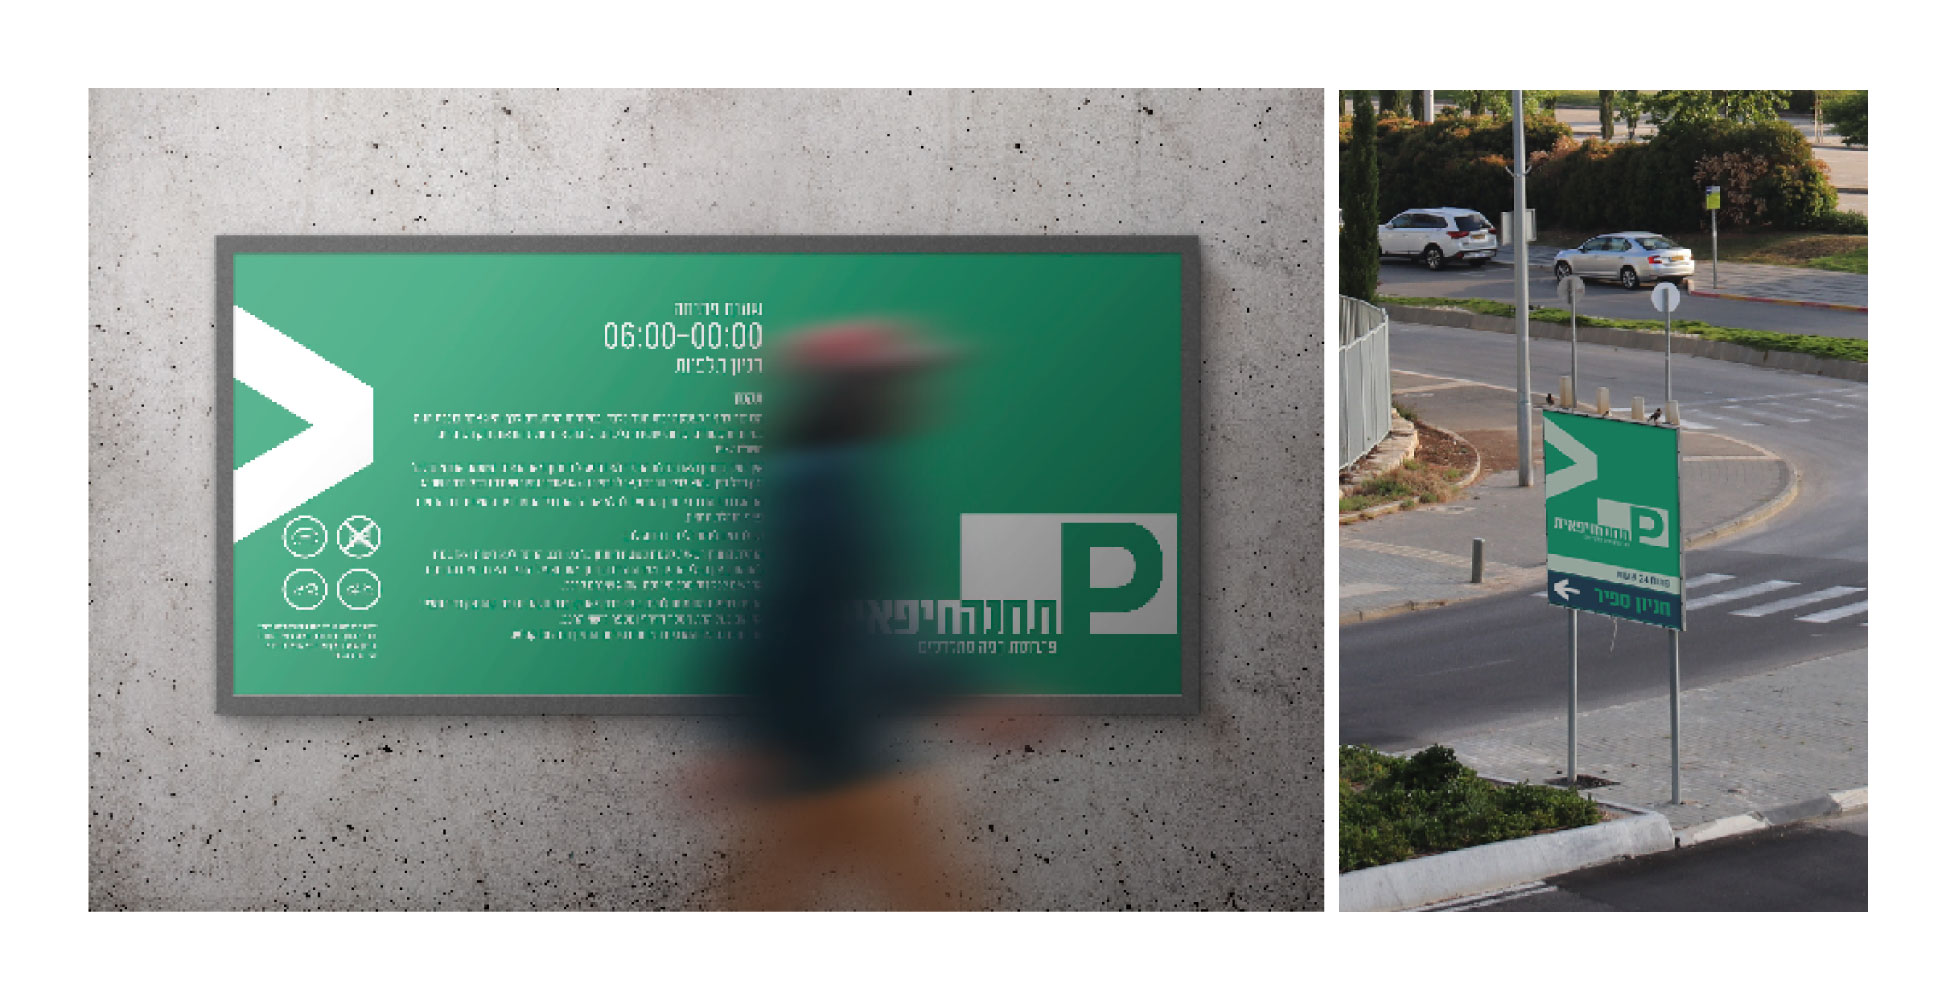 NotFromHere-Brand-Agency-Signage-Design4